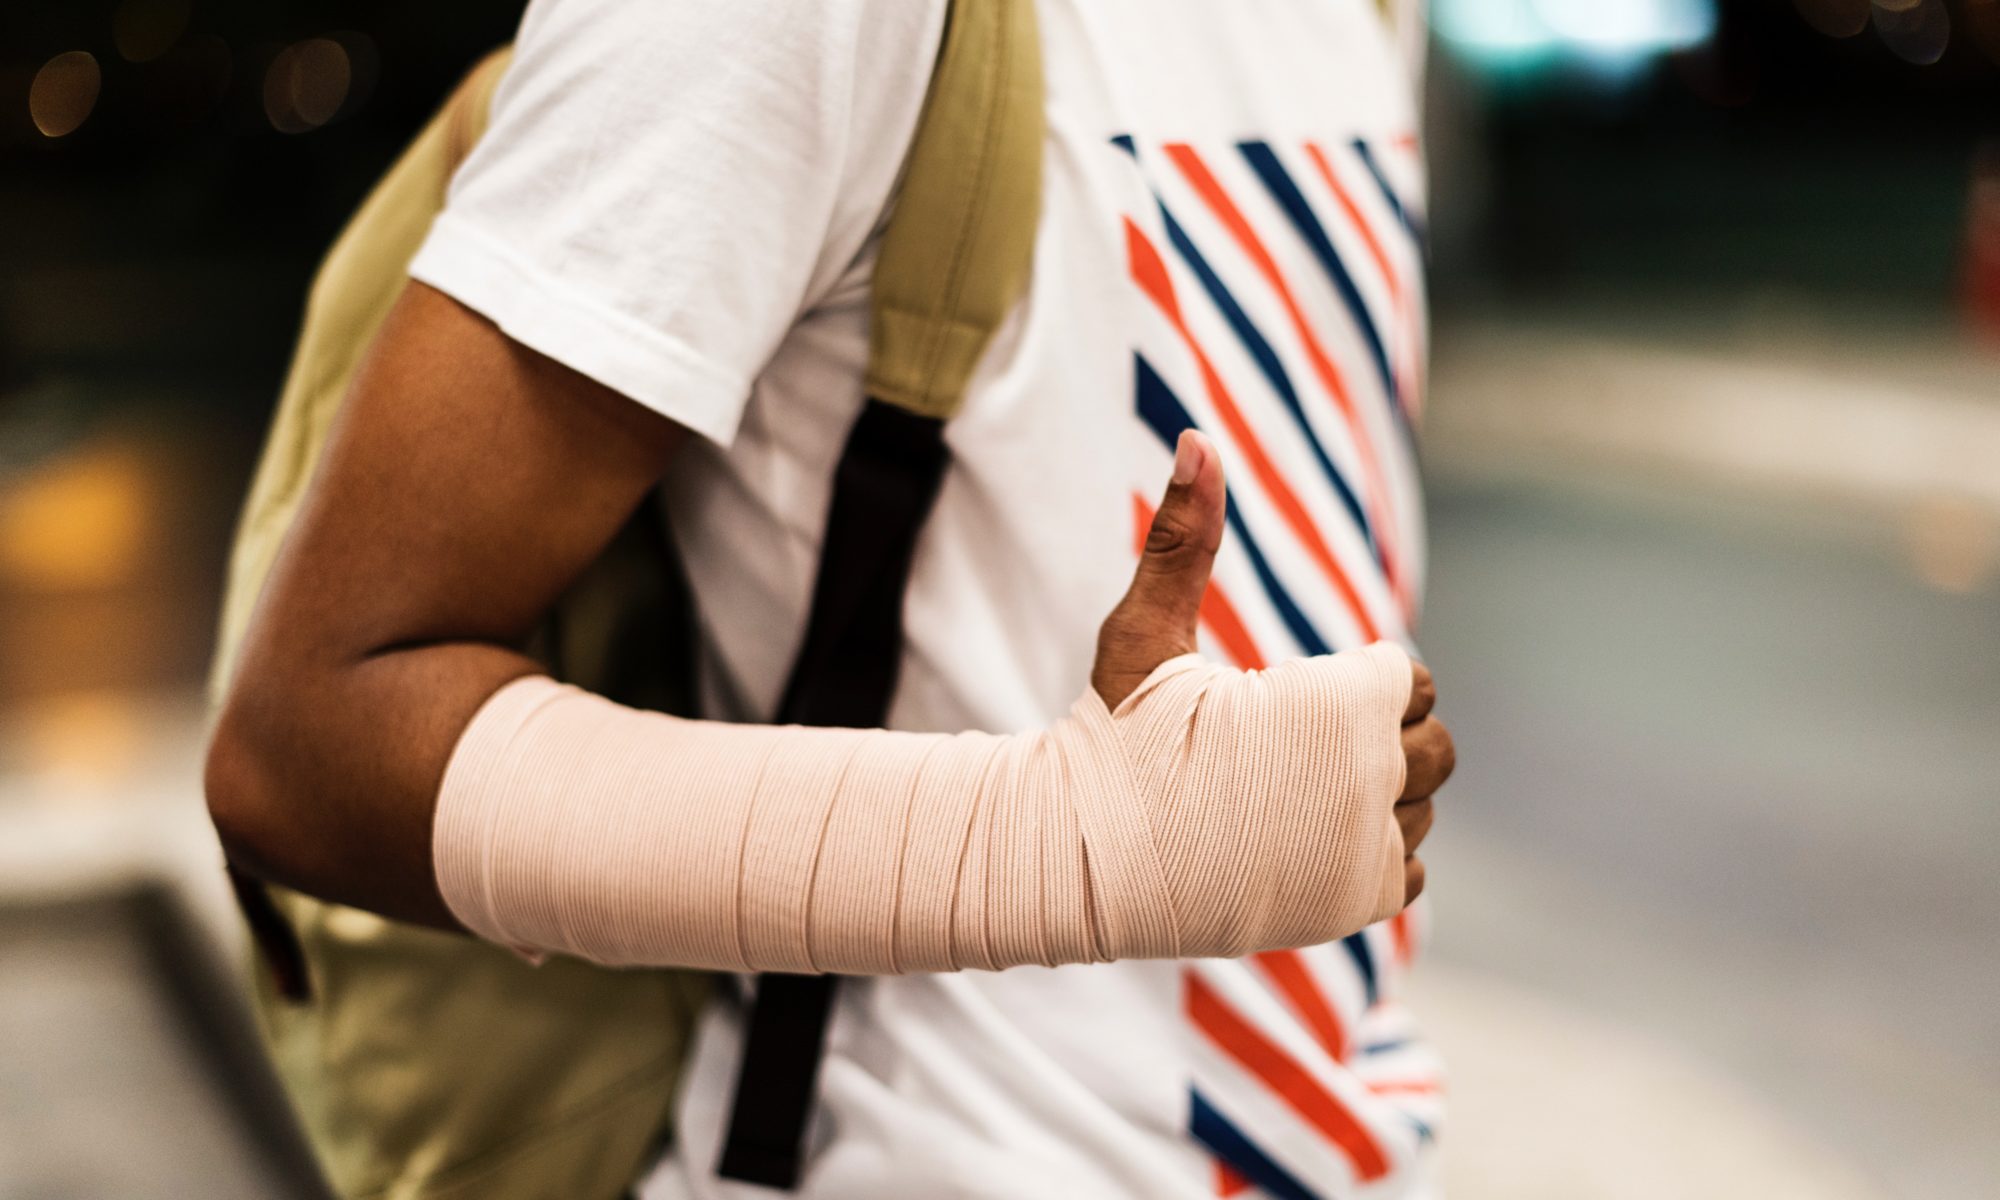 man with hand bandage wearing backpack standing